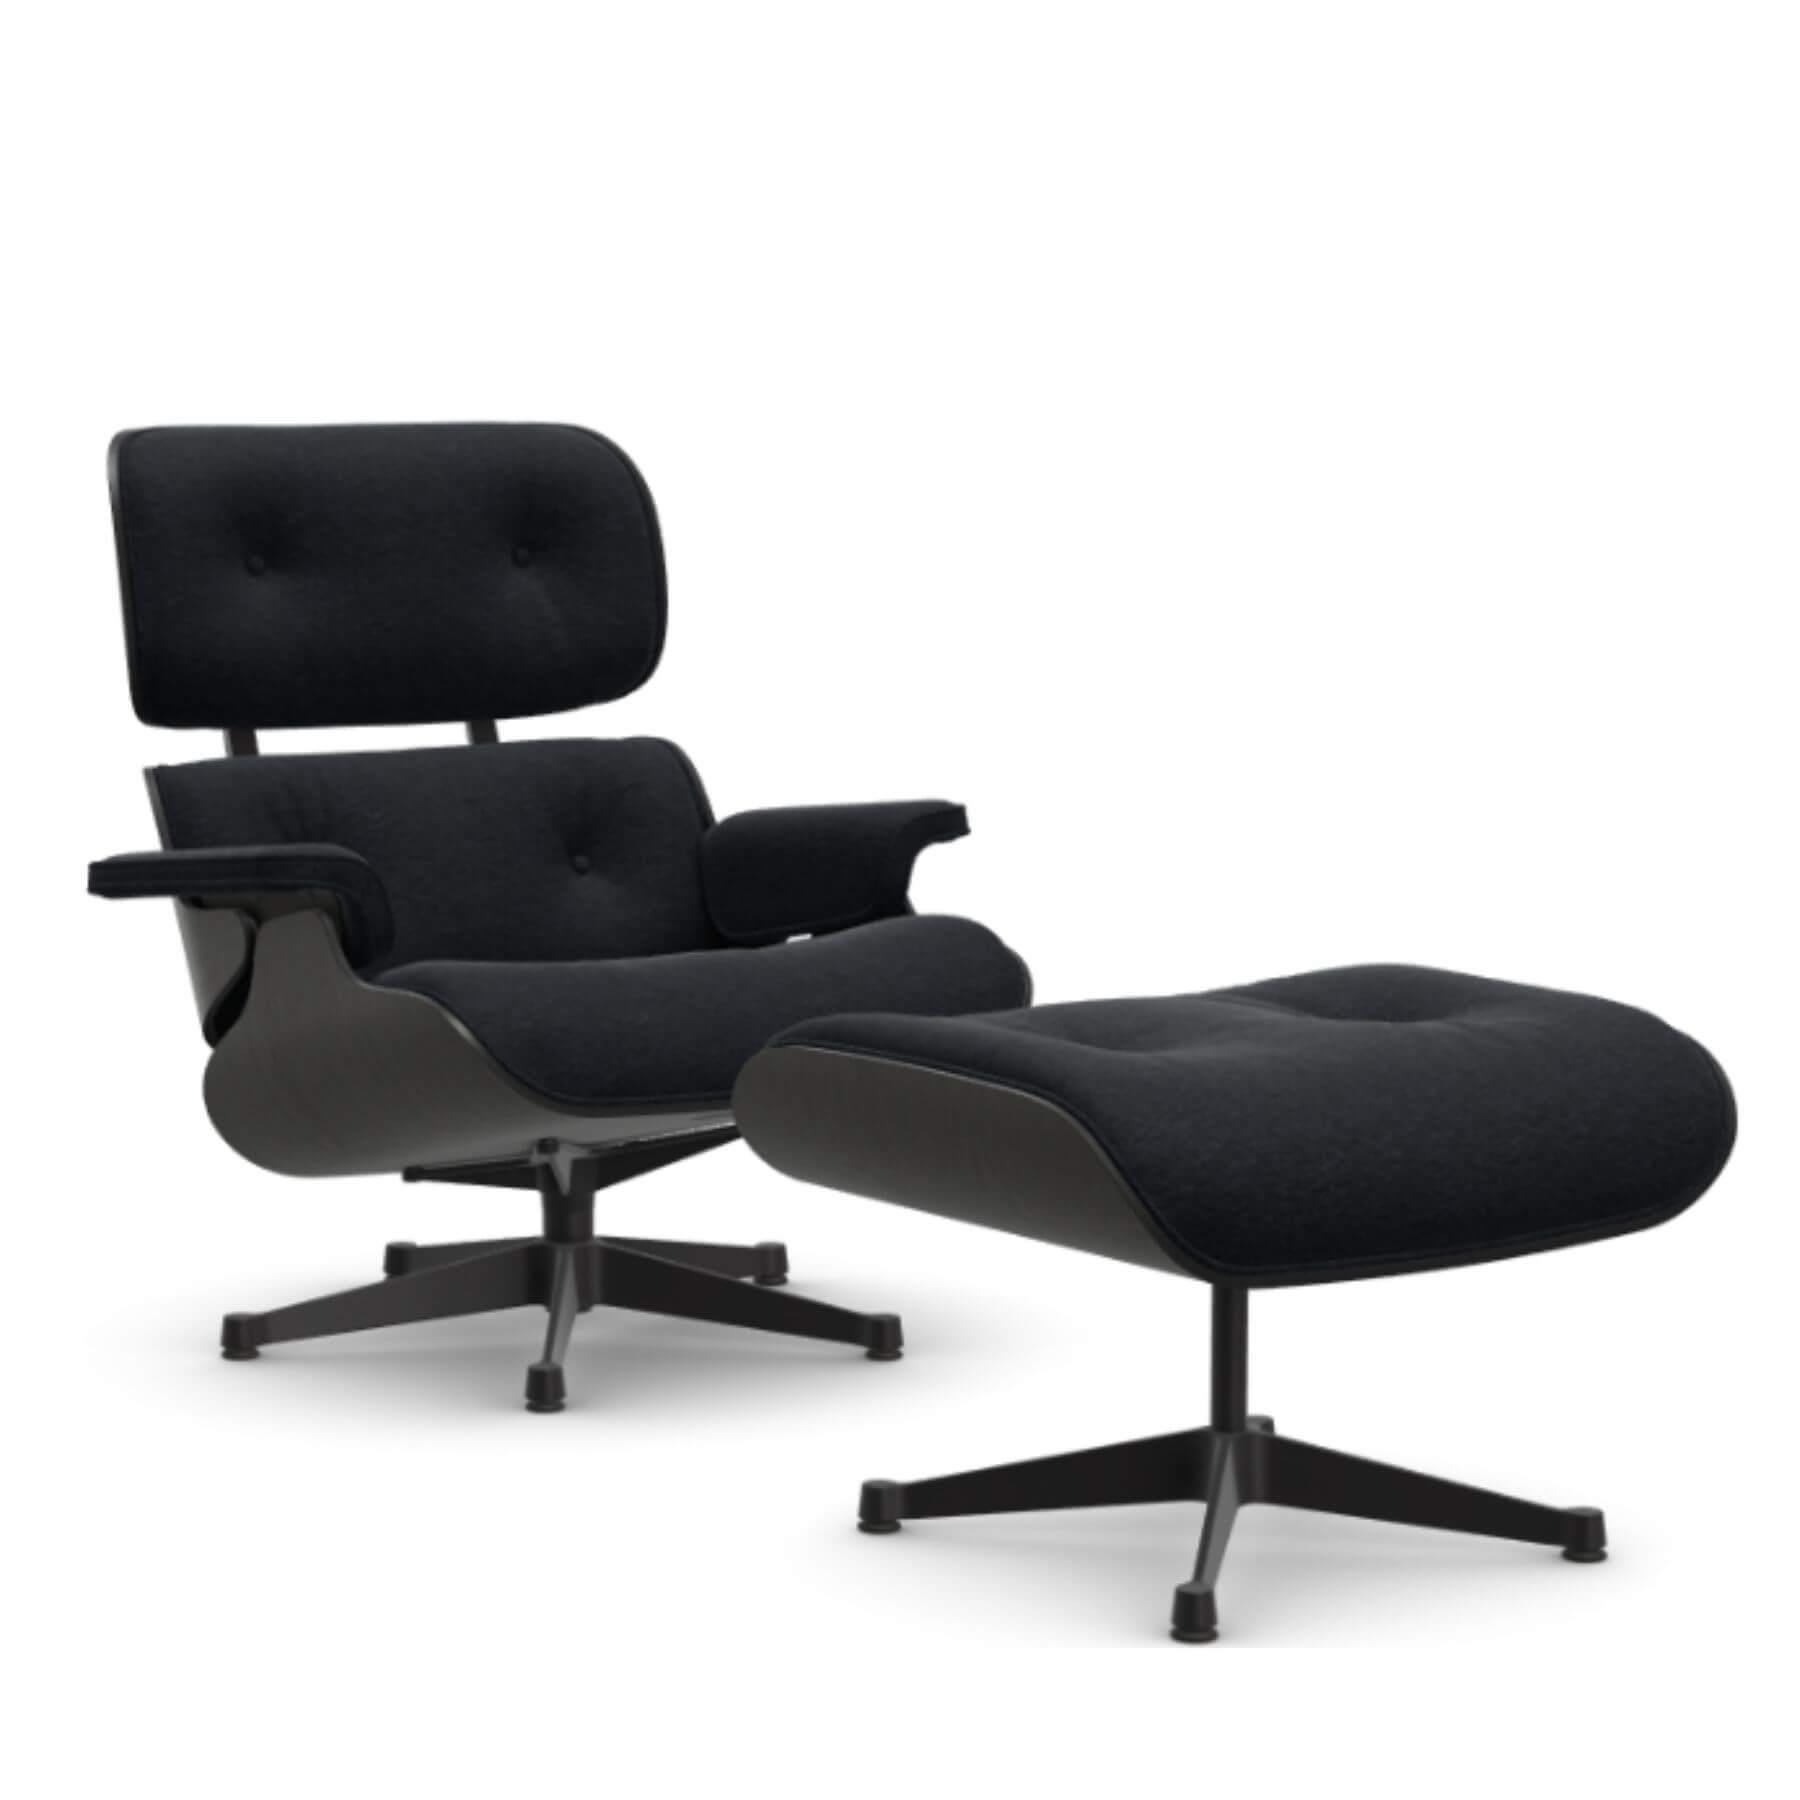 Vitra Eames Classic Lounge Chair Black Ash Nubia Anthracite Black Polished Black With Ottoman Designer Furniture From Holloways Of Ludlow